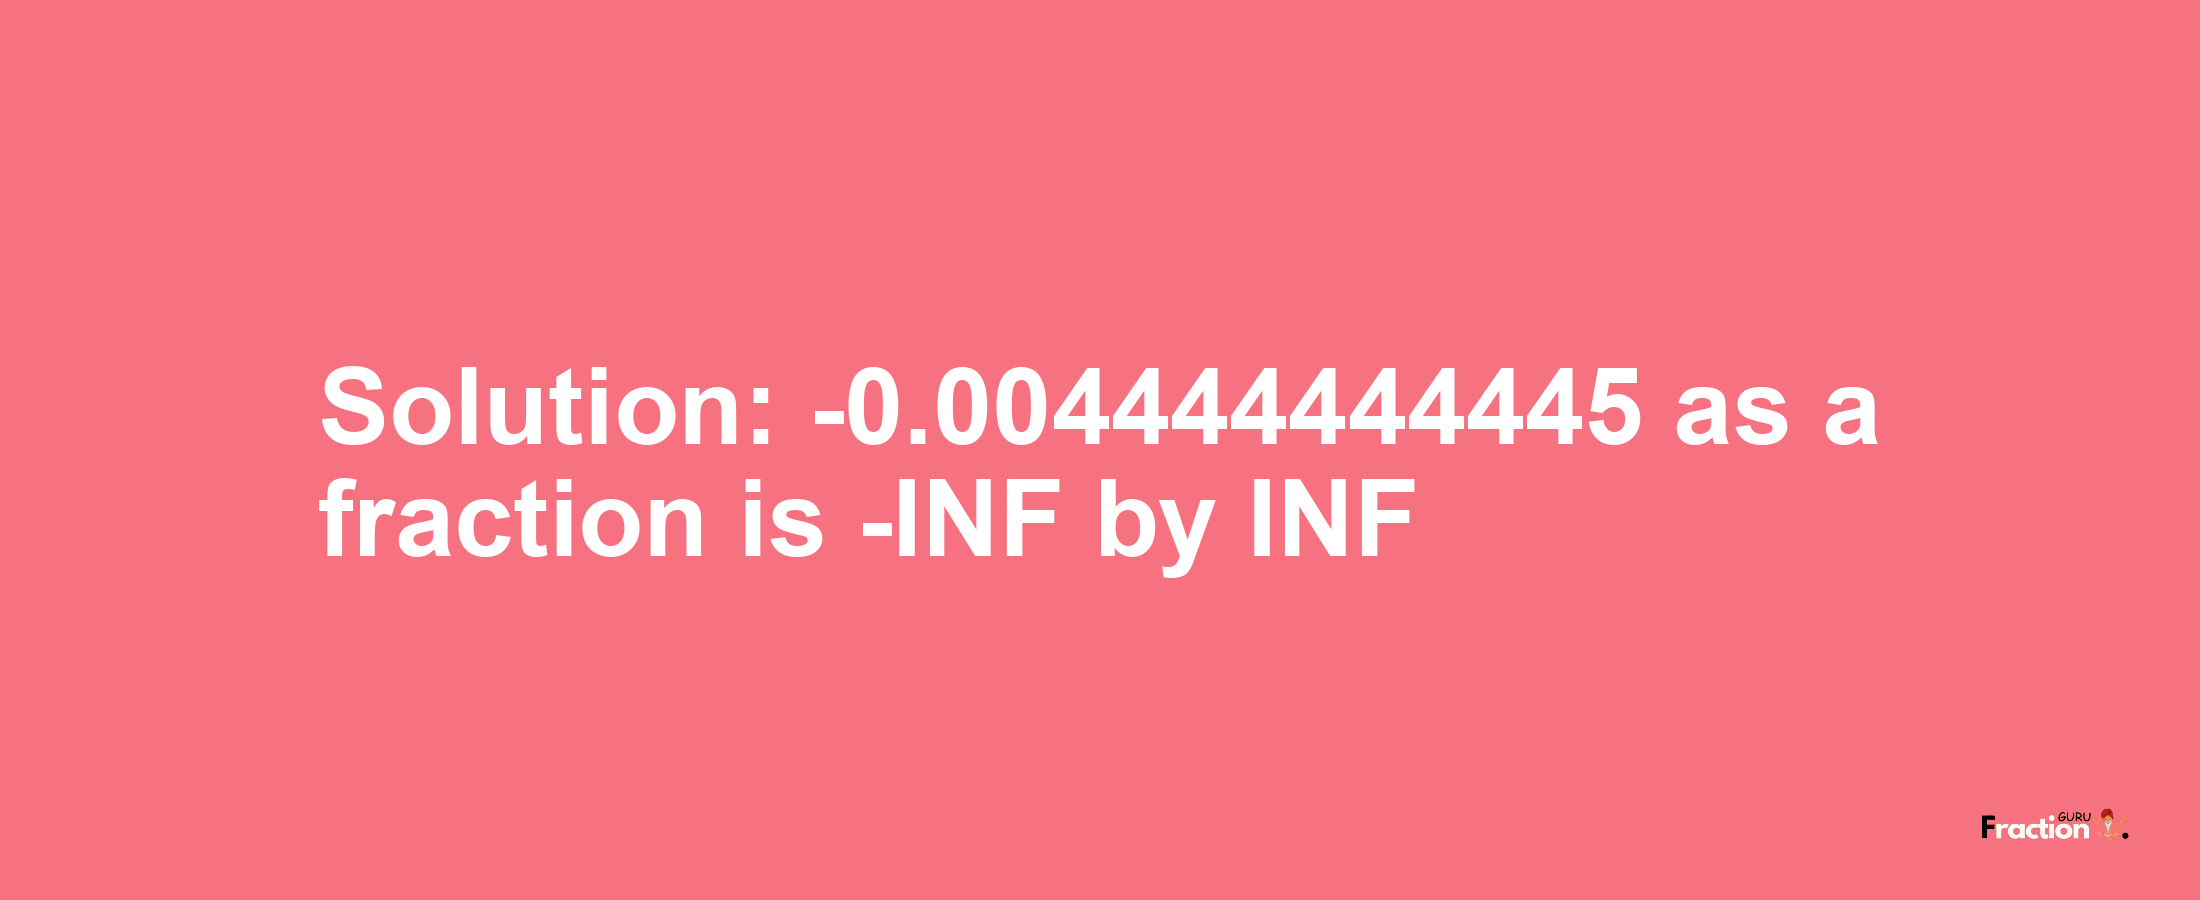 Solution:-0.004444444445 as a fraction is -INF/INF